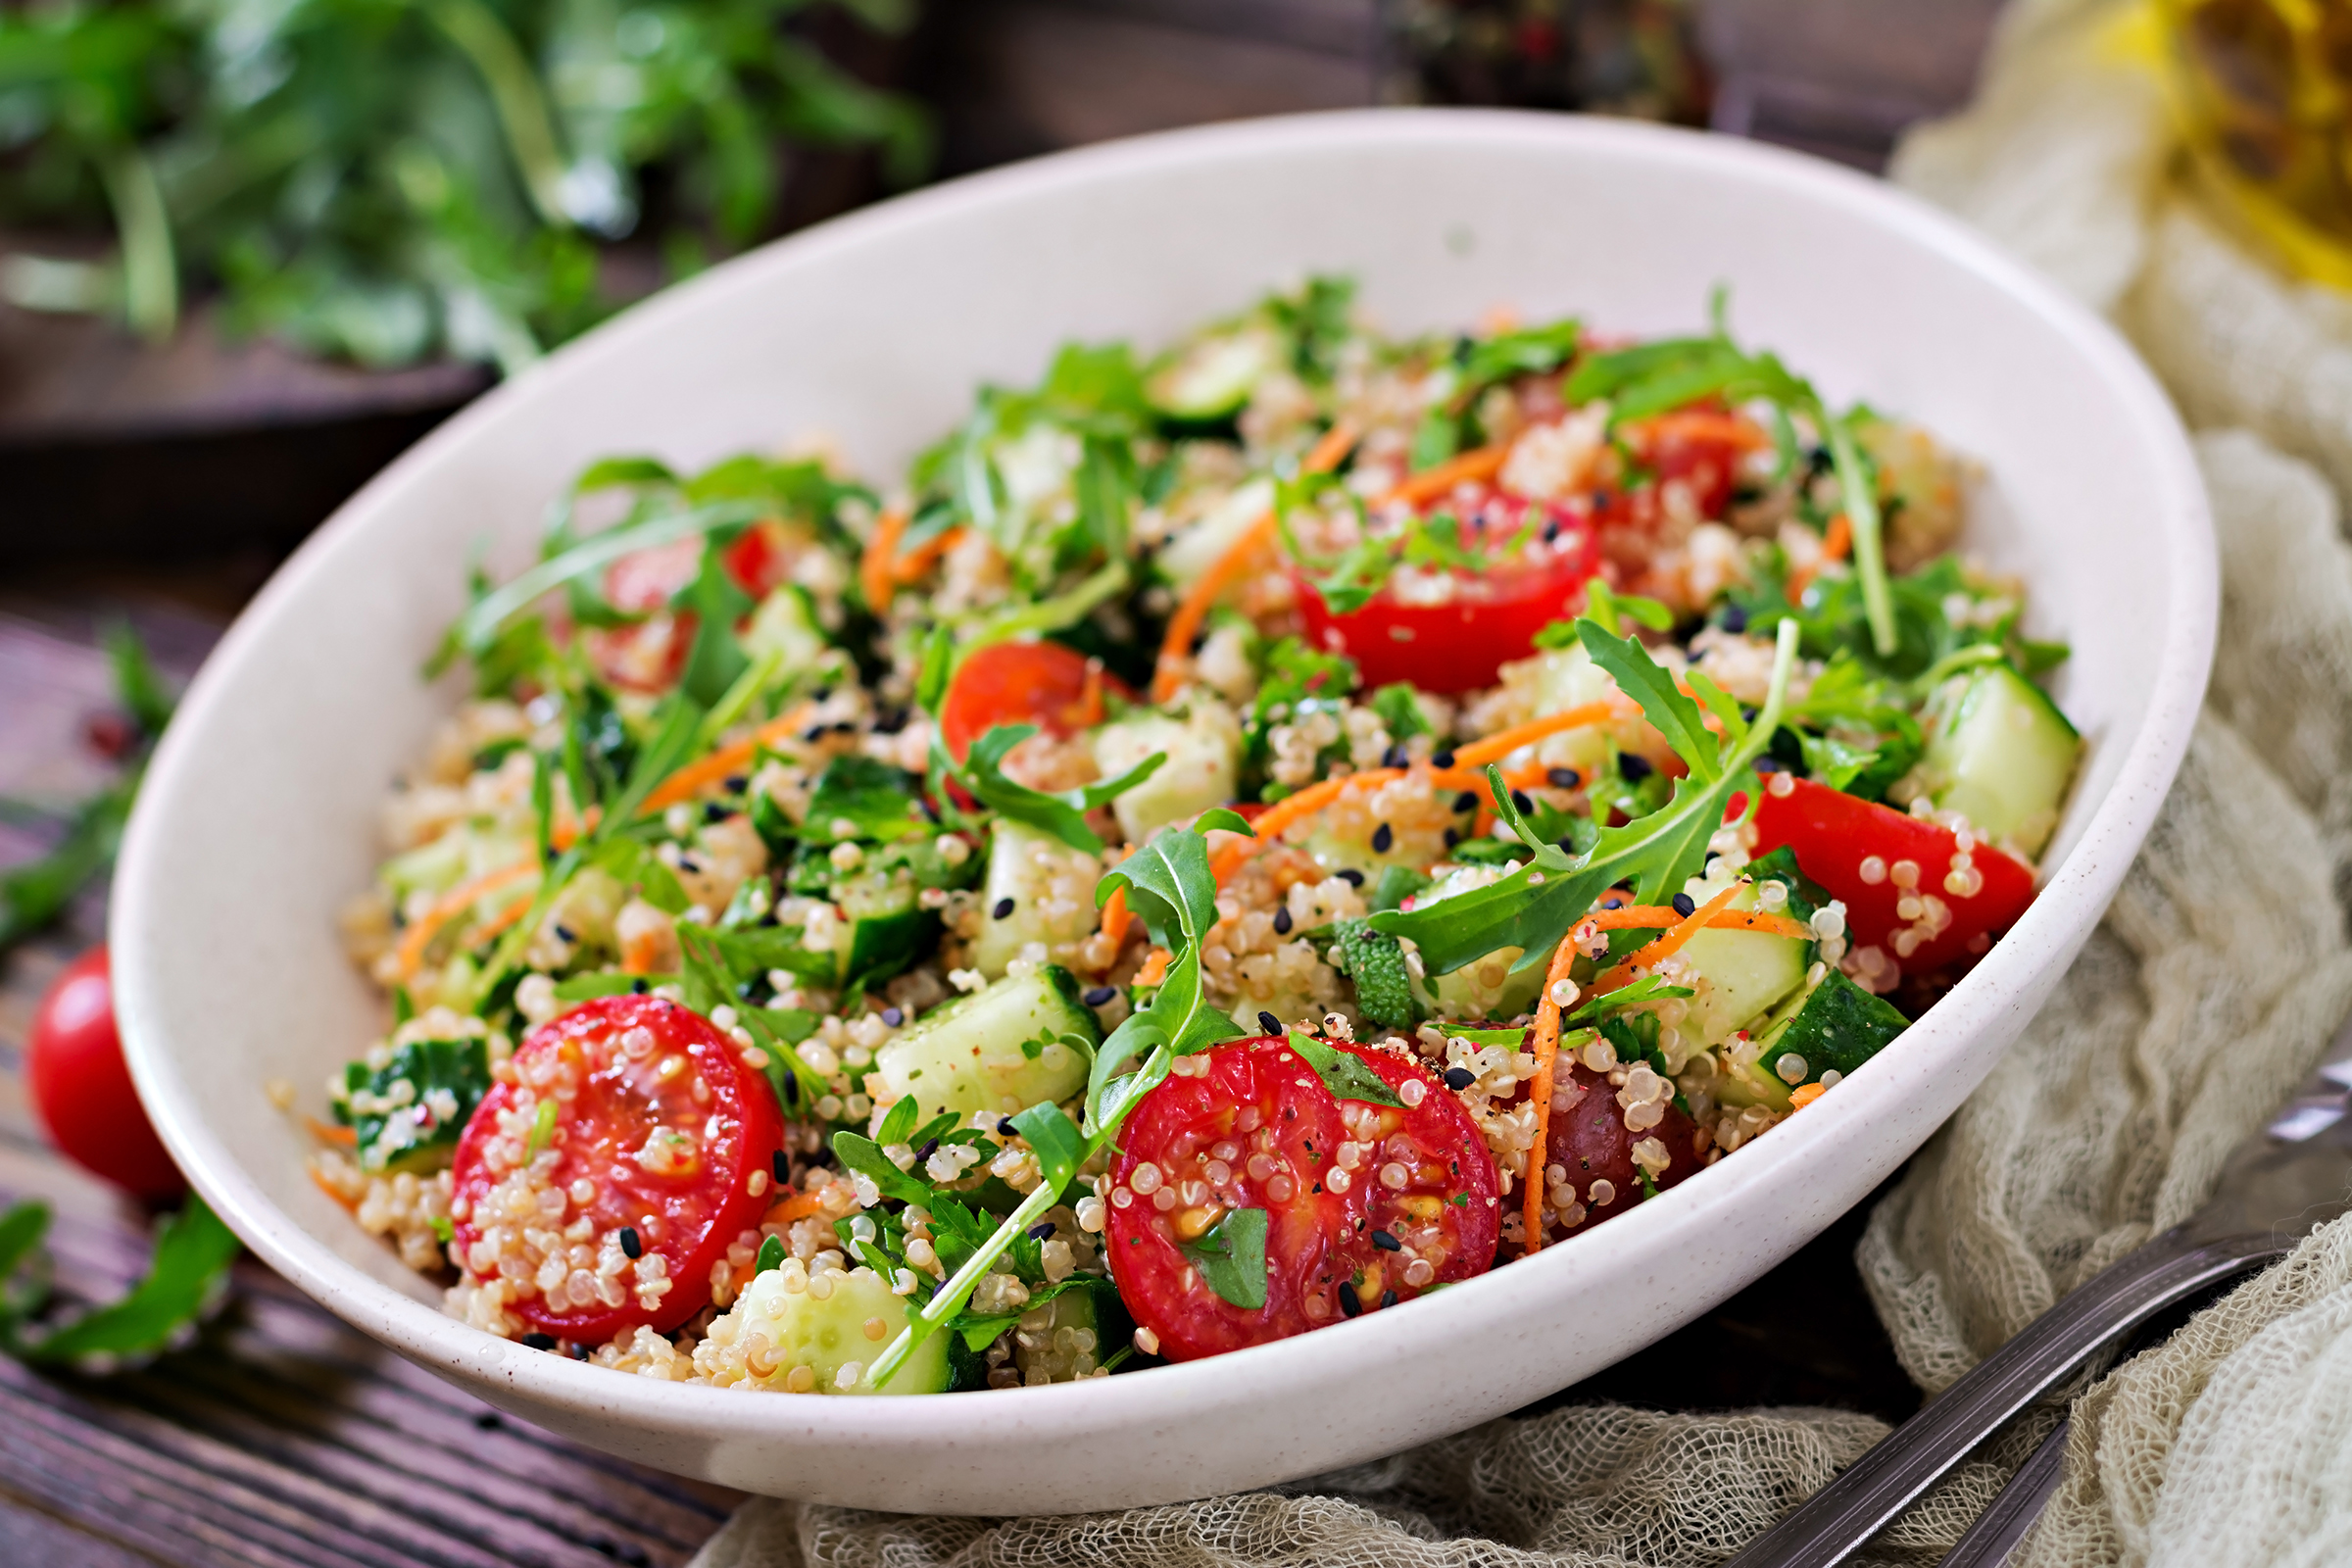 https://www.quadcitiesbusinessnews.com/wp-content/uploads/2023/04/salads-with-quinoa-arugula-radish-tomatoes-cucumber-bowl-wooden-table-healthy-food-diet-detox-vegetarian-concept.jpg